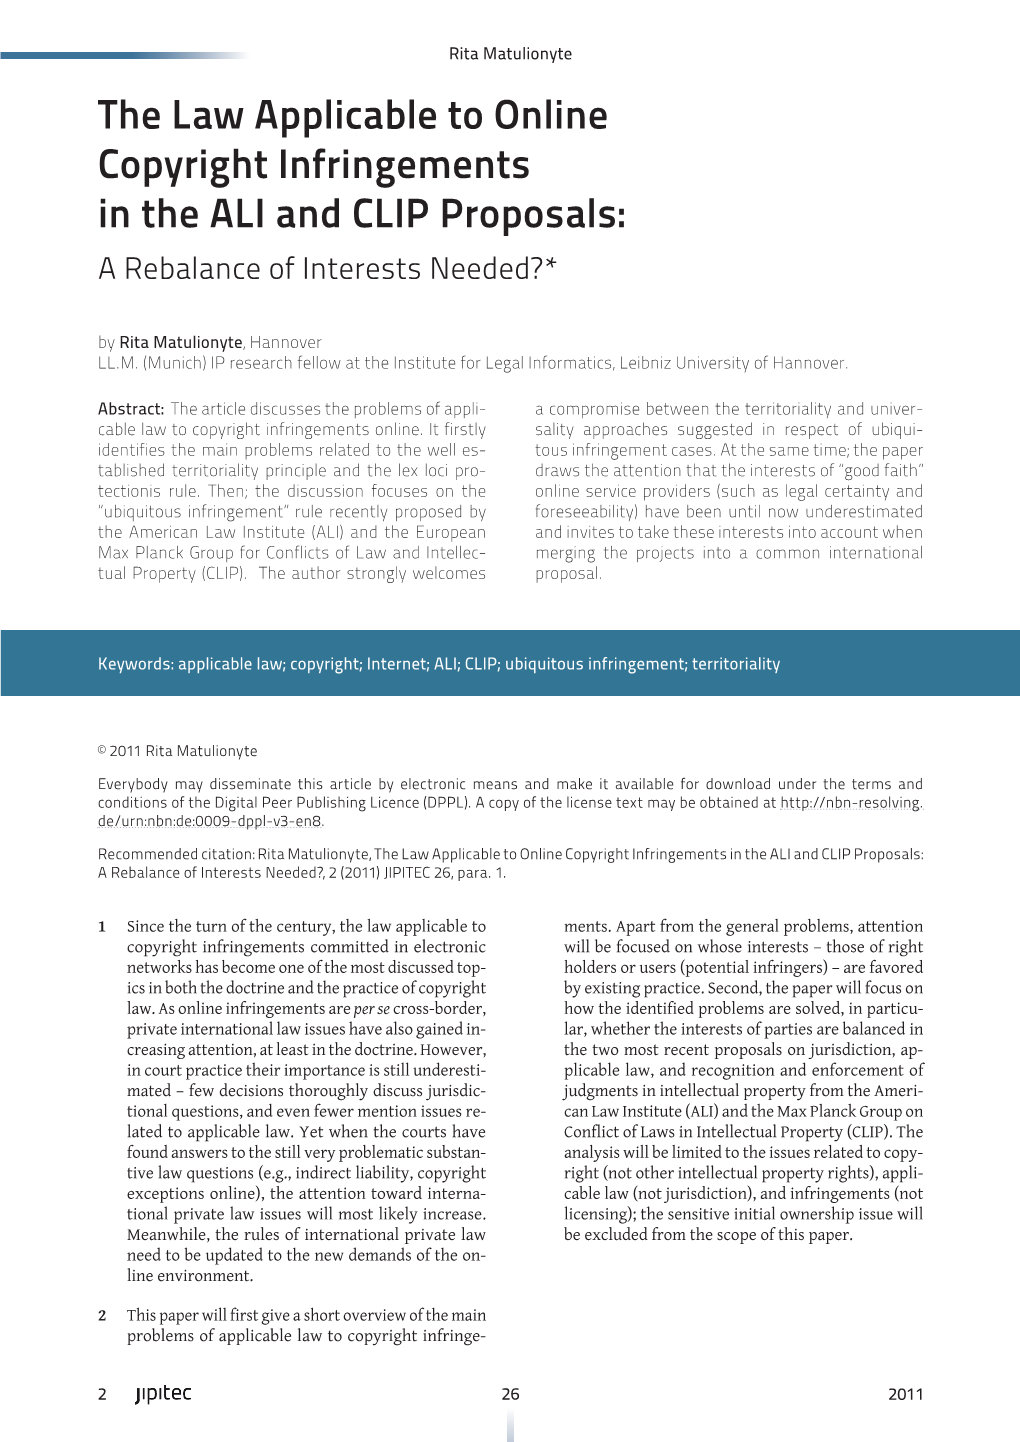 The Law Applicable to Online Copyright Infringements in the ALI and CLIP Proposals: a Rebalance of Interests Needed?*